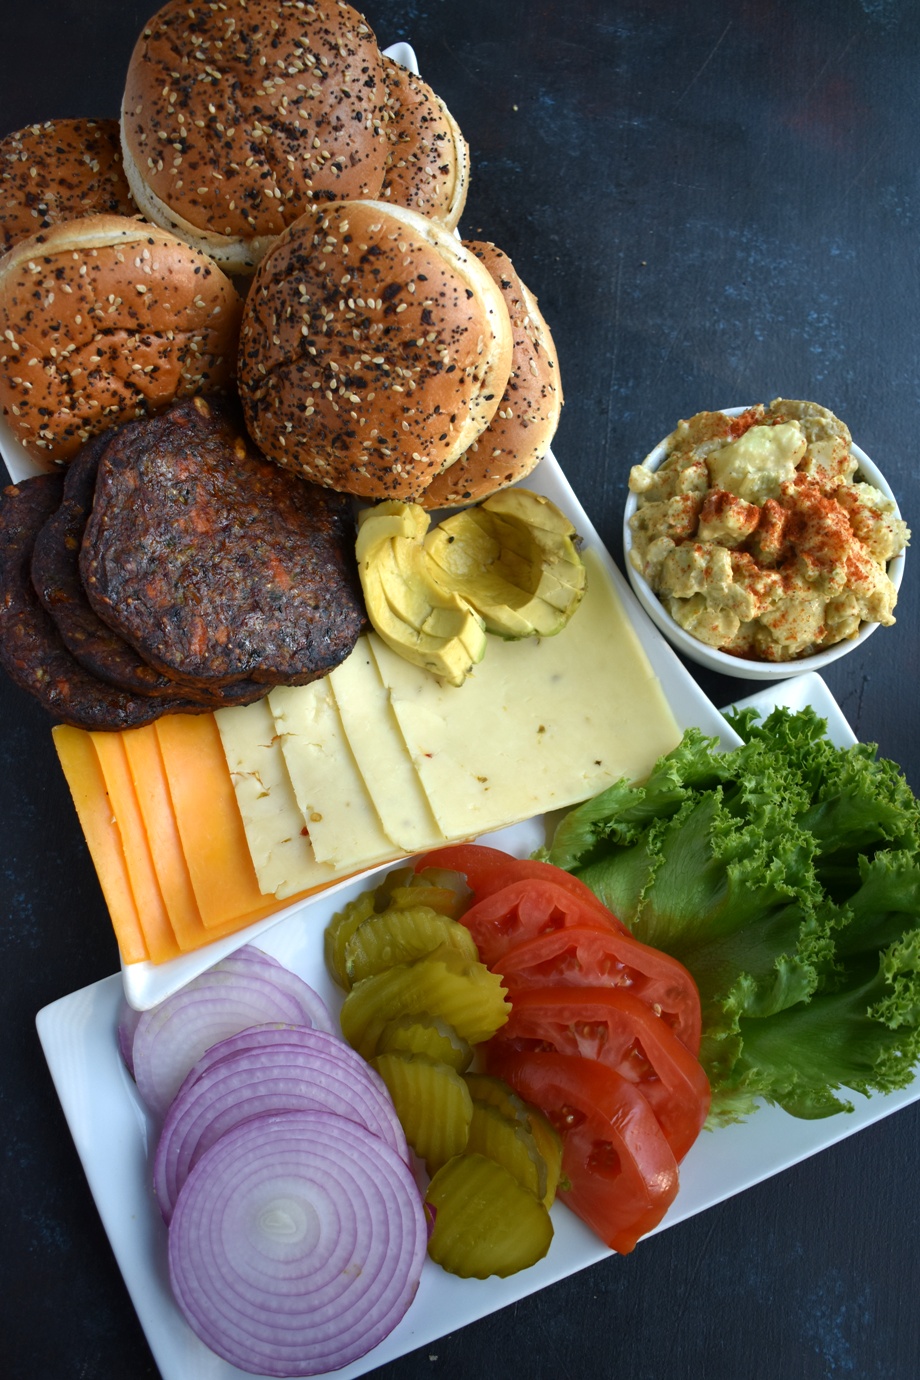 Vegetarian Burger Bar has all your favorite burger toppings including tomato, lettuce, onion, pickles, cheese, avocado, veggie burgers and more for easy entertaining that everyone will love! www.nutritionistreviews.com